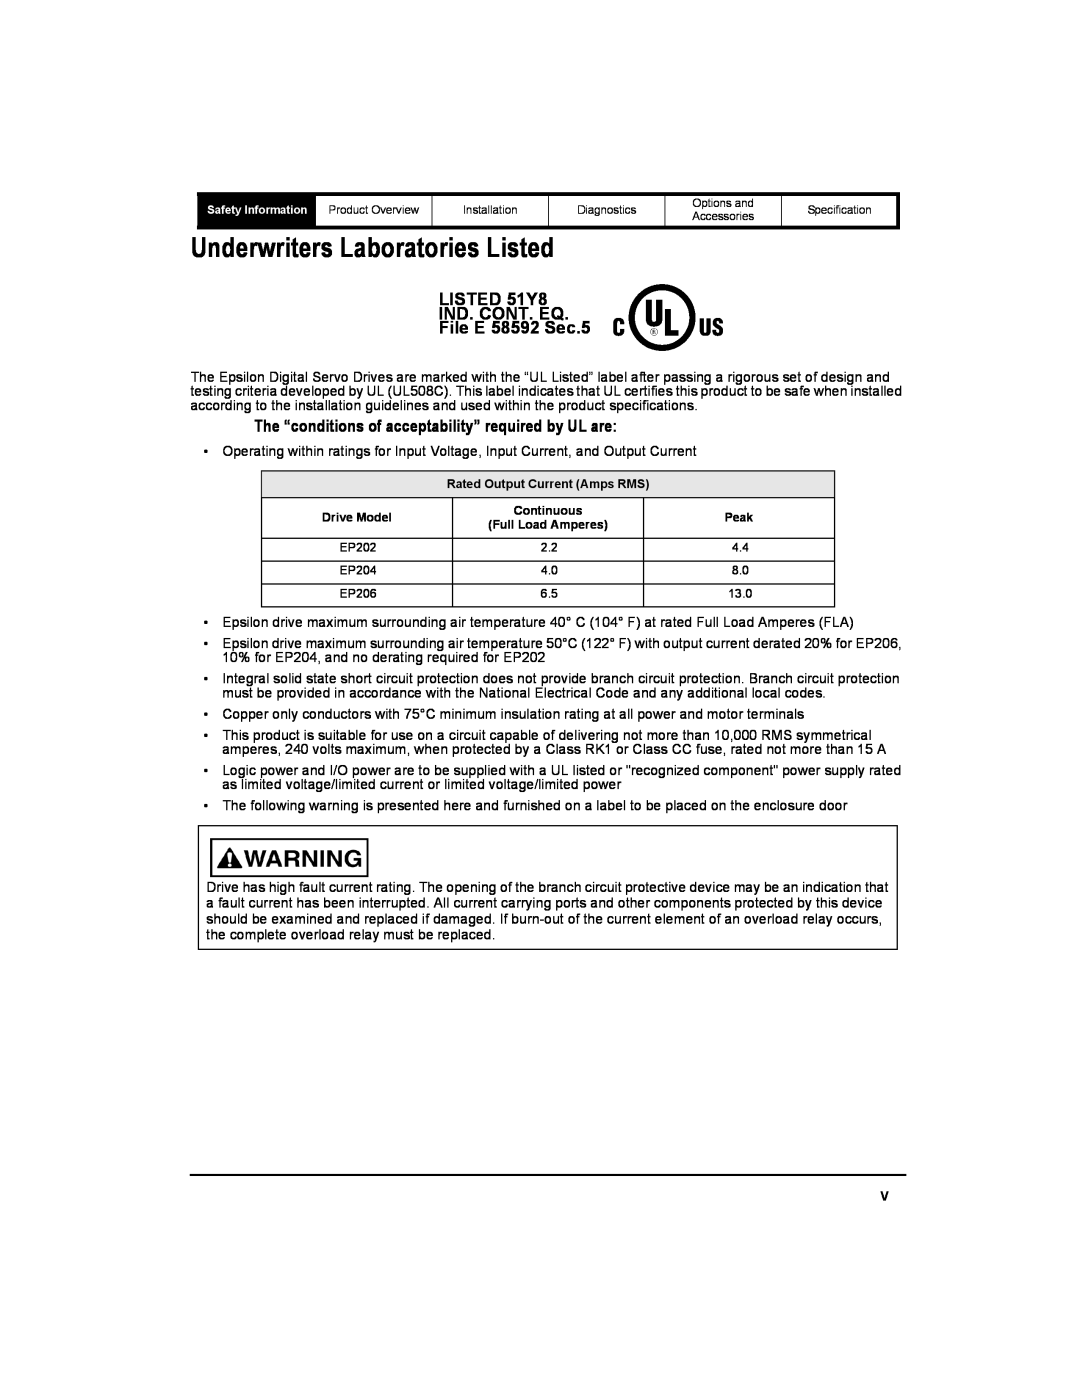 Emerson 400518-01 installation manual Underwriters Laboratories Listed, LISTED 51Y8 IND. CONT. EQ File E 58592 Sec.5 